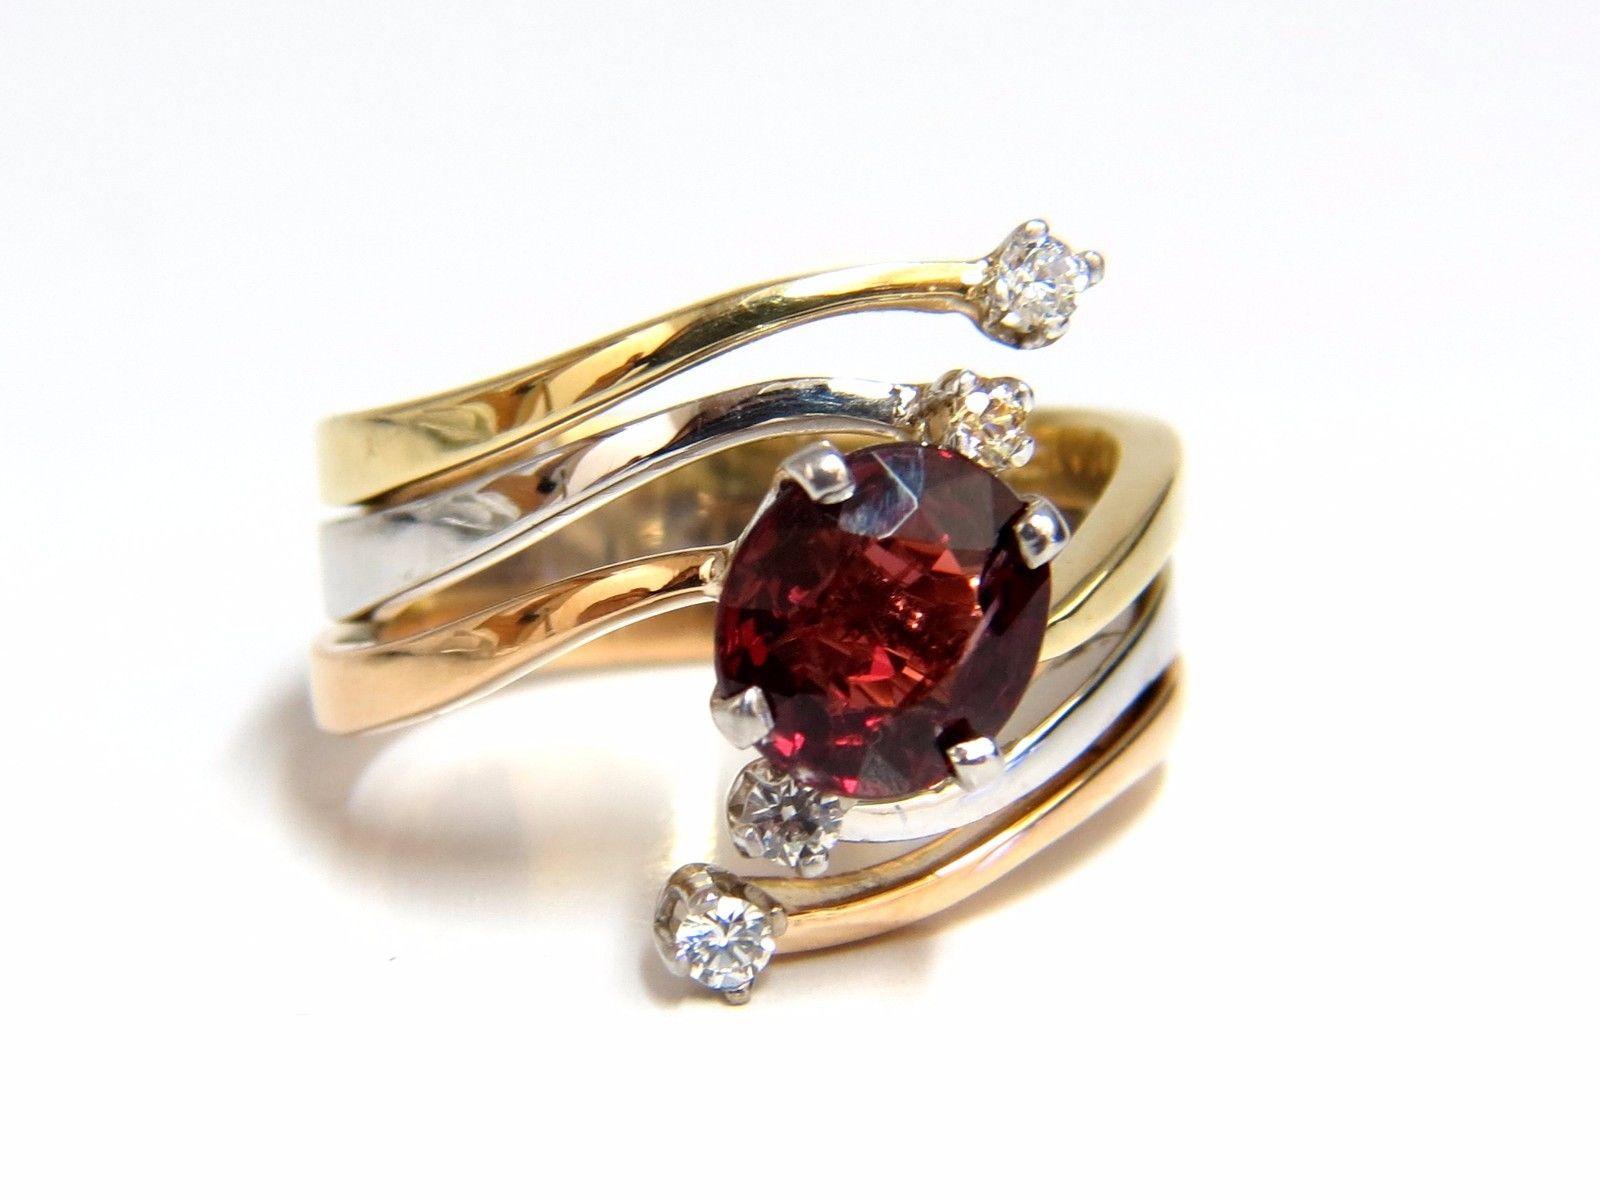 1.80ct. Natural Red Spinel diamond ring

7.6 x 7mm

Oval Brilliant cut

Transparent / Vivid Red / Blood Orange color.

Round, full cut diamonds:

.20ct. 

H color, vs-2 clarity.



14kt. white gold.

8 Grams

Ring .67 inch wide.

Depth of ring: .32